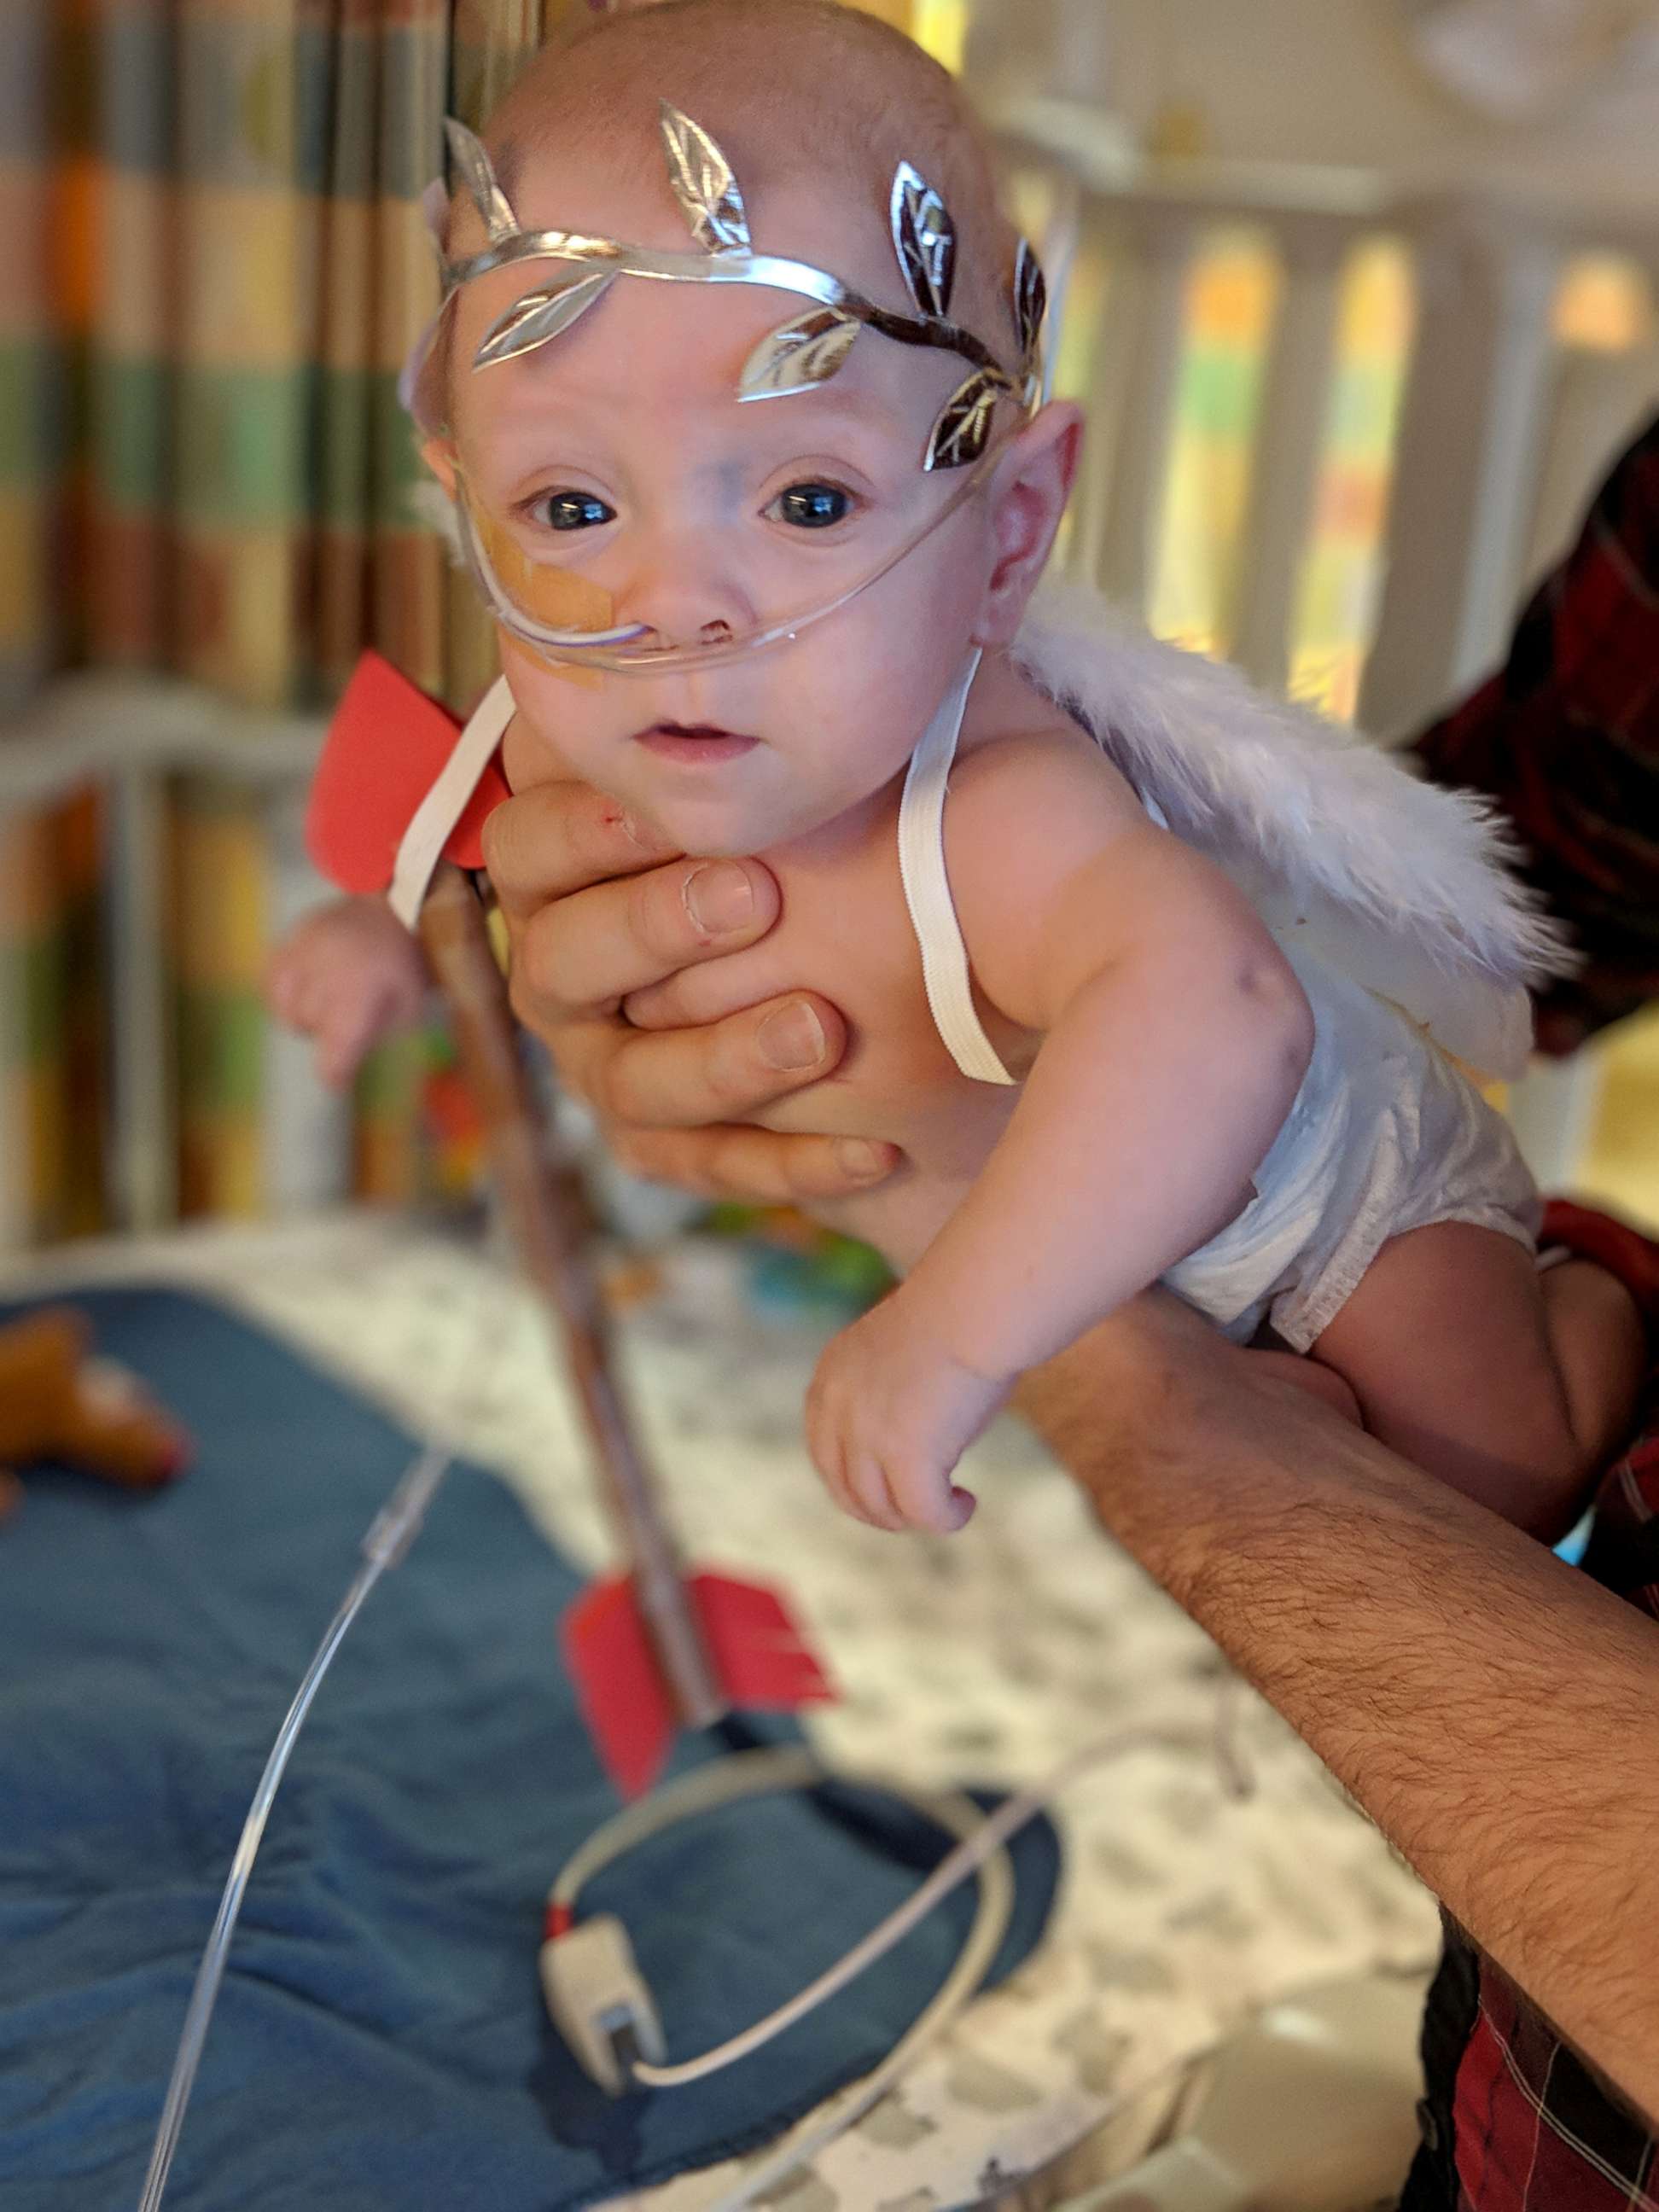 PHOTO: Eight-month-old Connor Florio of Danbury, Connecticut, a former 26-week micro preemie born less than 11 ounces in New York.